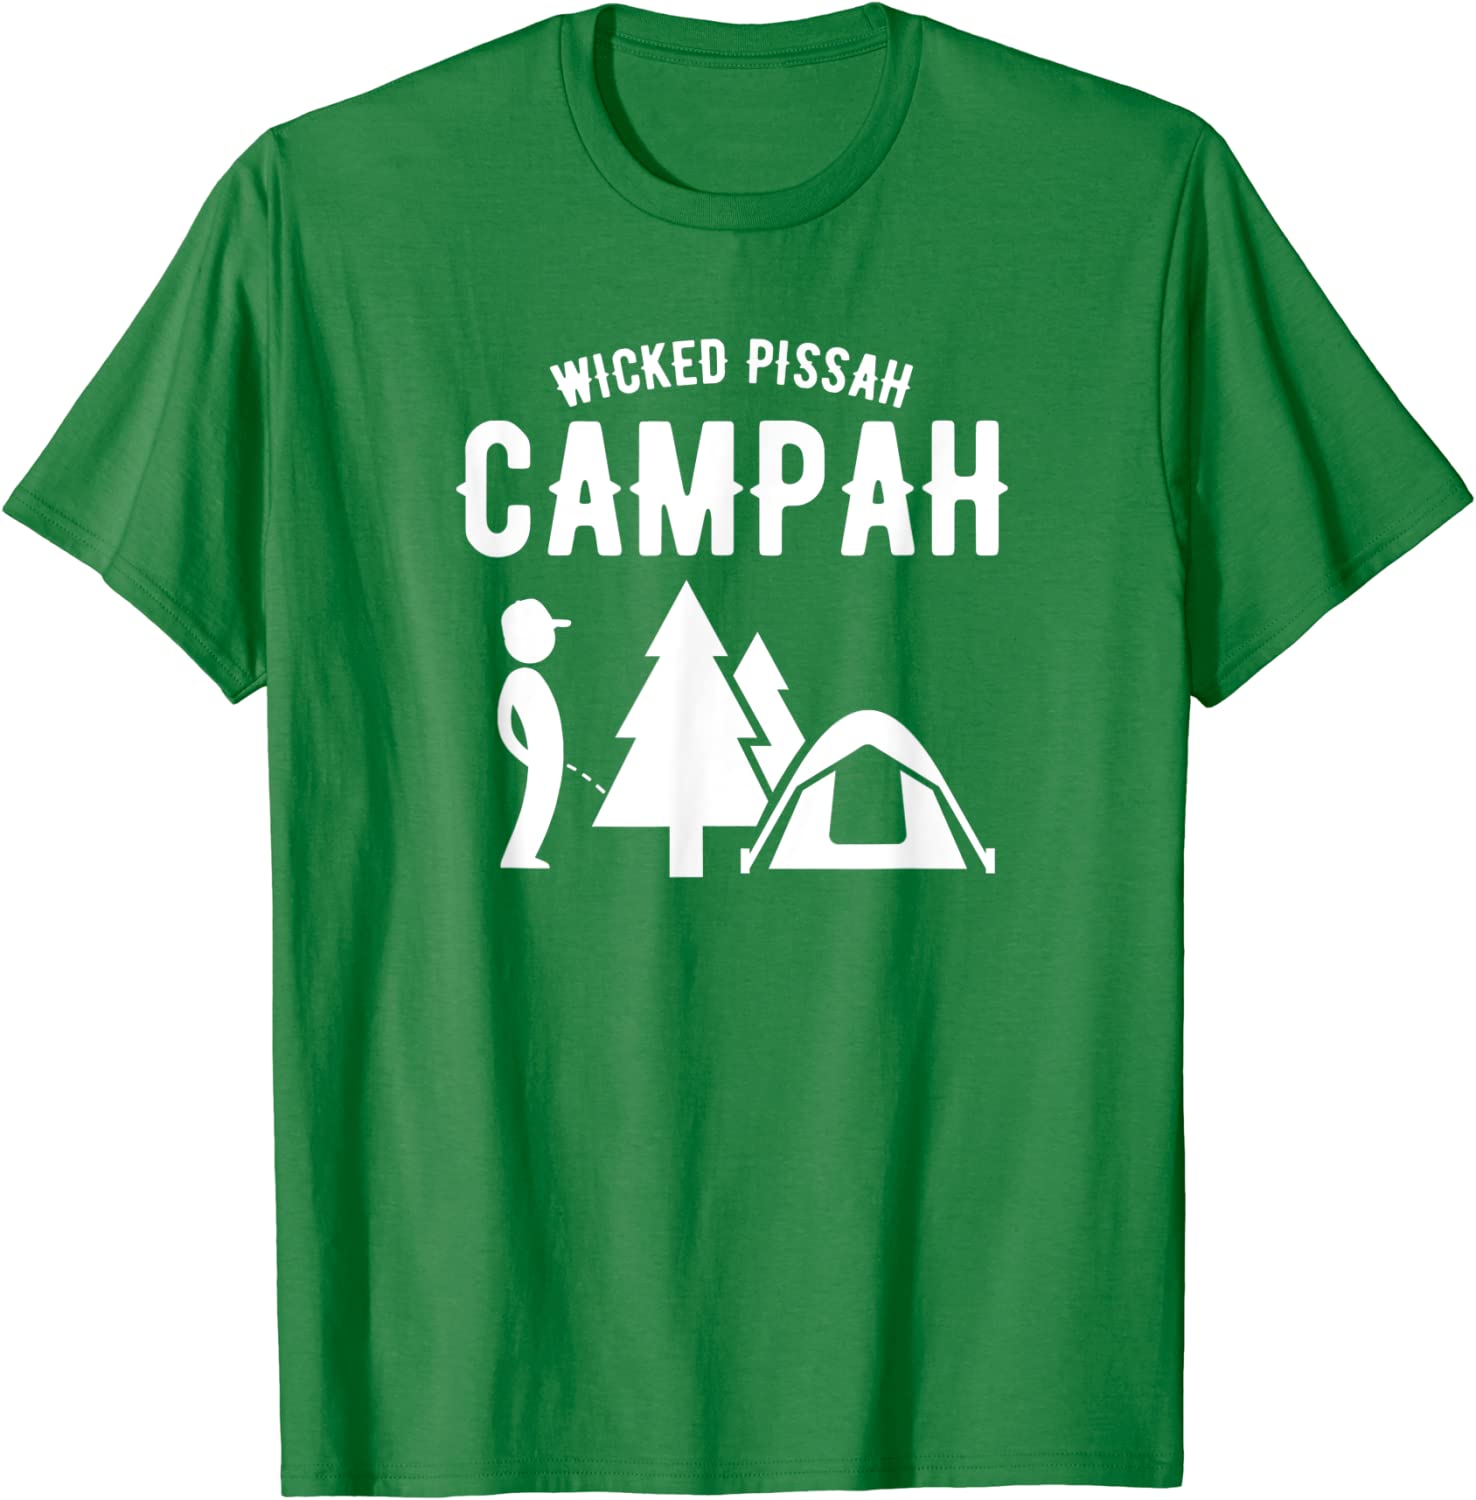 wicked pissah campah t-shirt